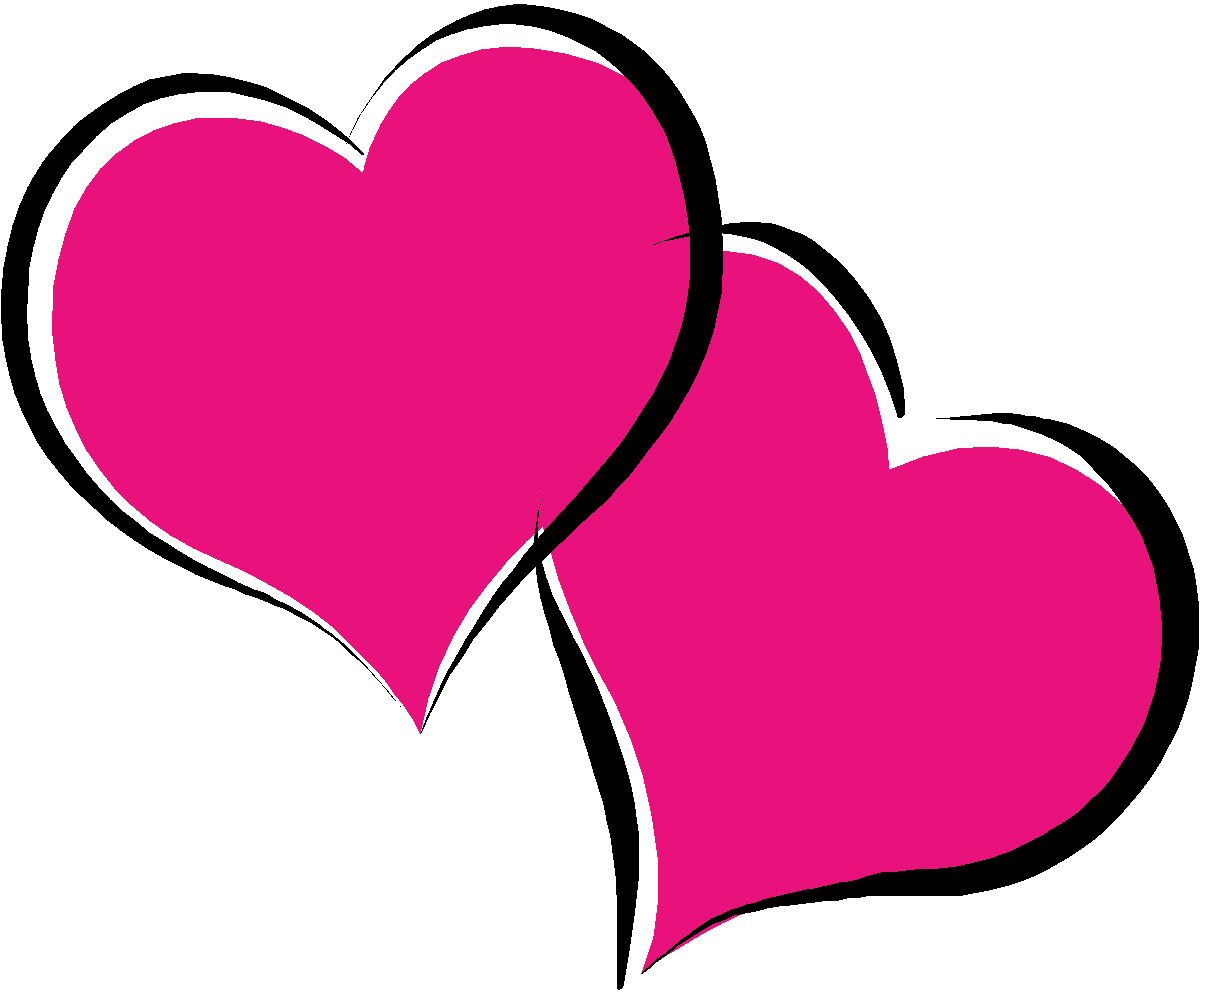 Valentines Day Hearts Pictures - Valentines Day Hearts Wallpapers ...